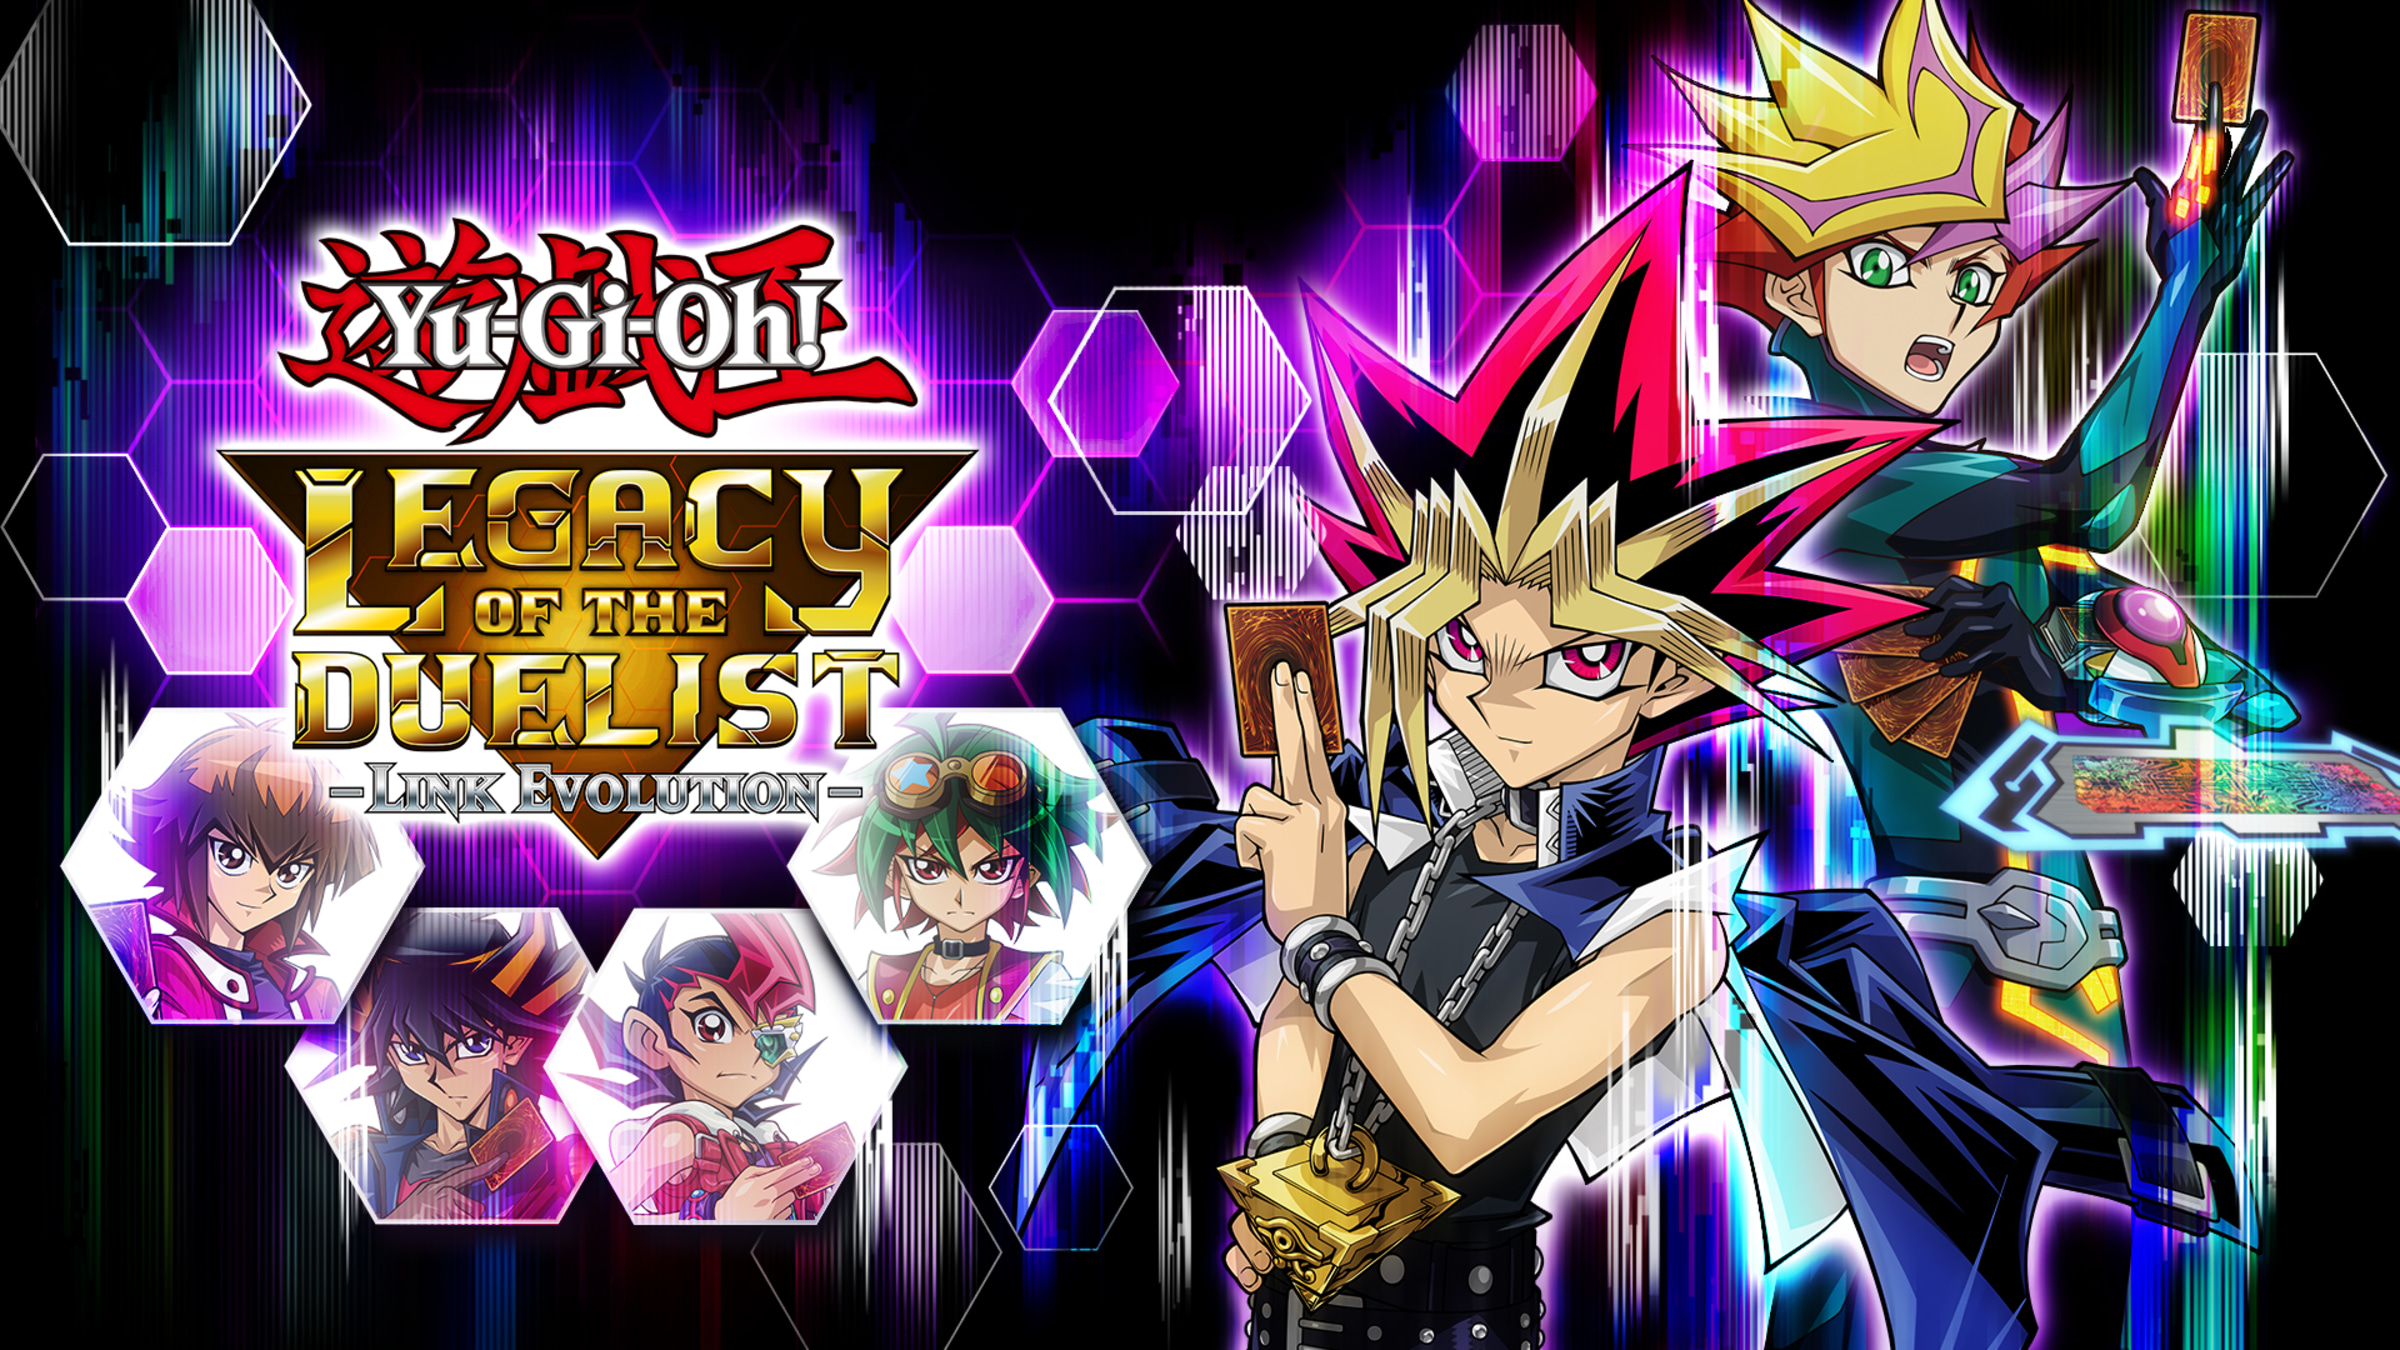 YuGiOh! Legacy of the Duelist Link Evolution para Nintendo Switch